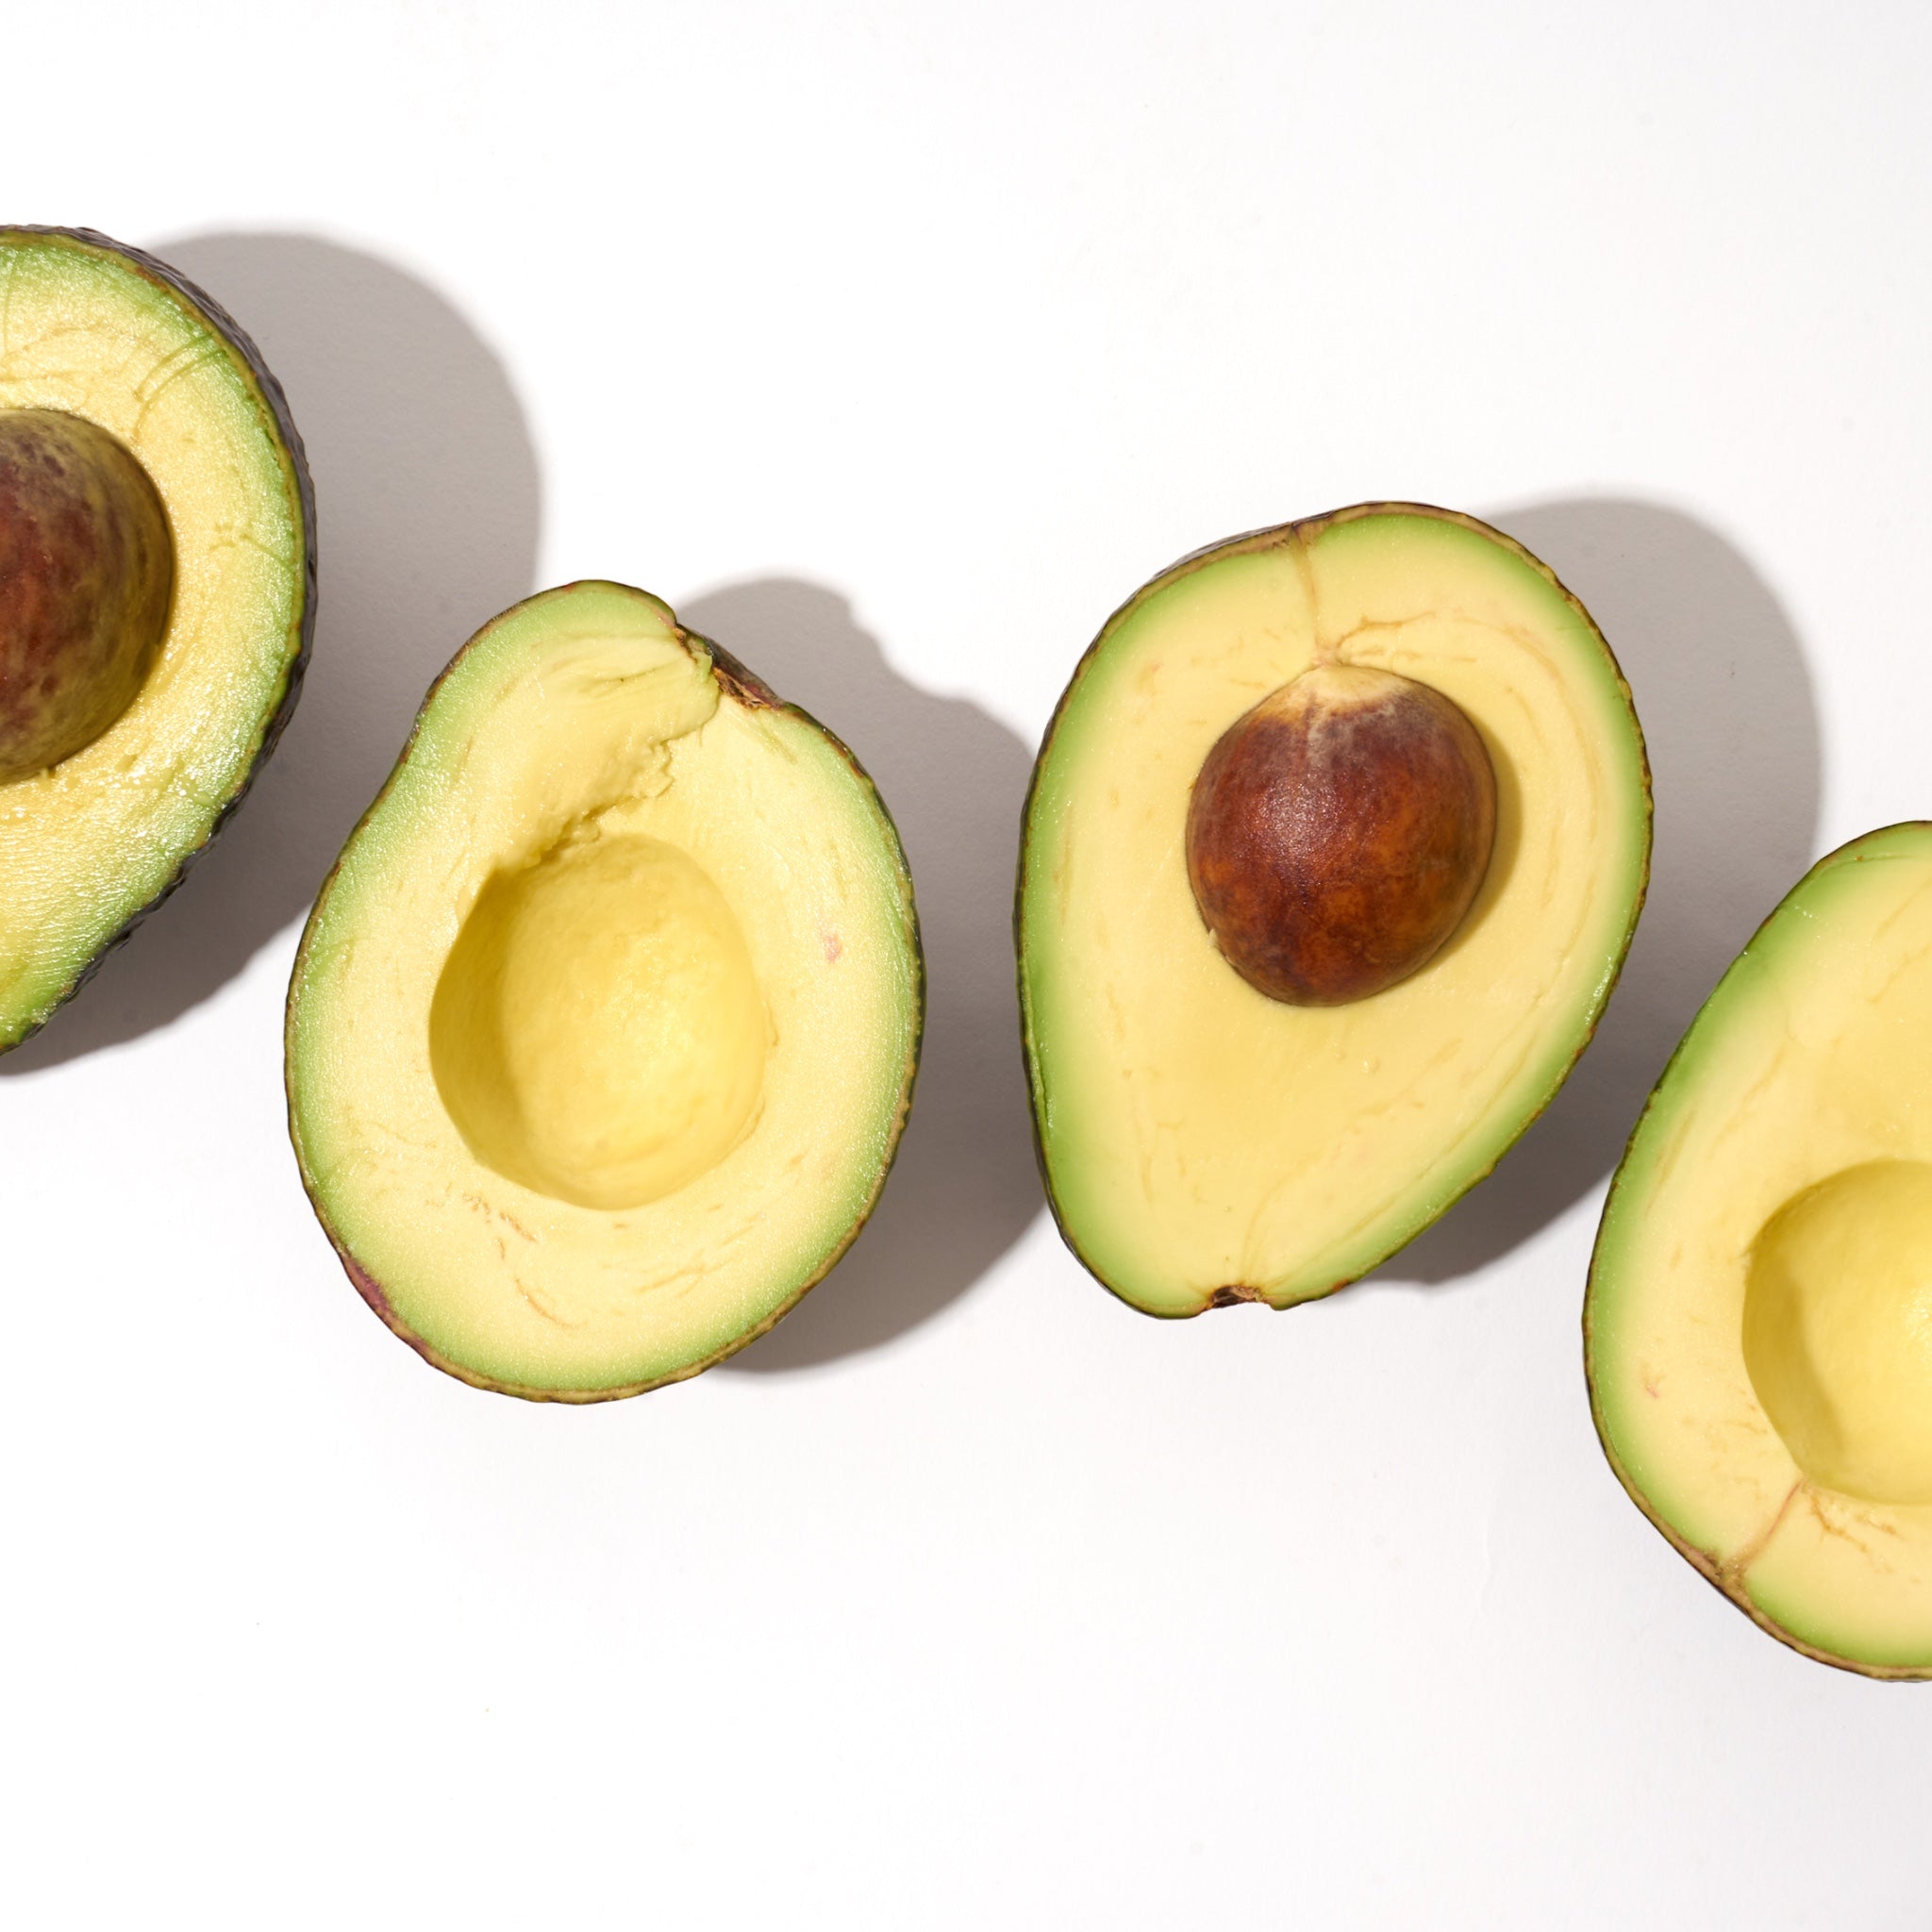 Fresh Avocados cut open and lined up on a white background